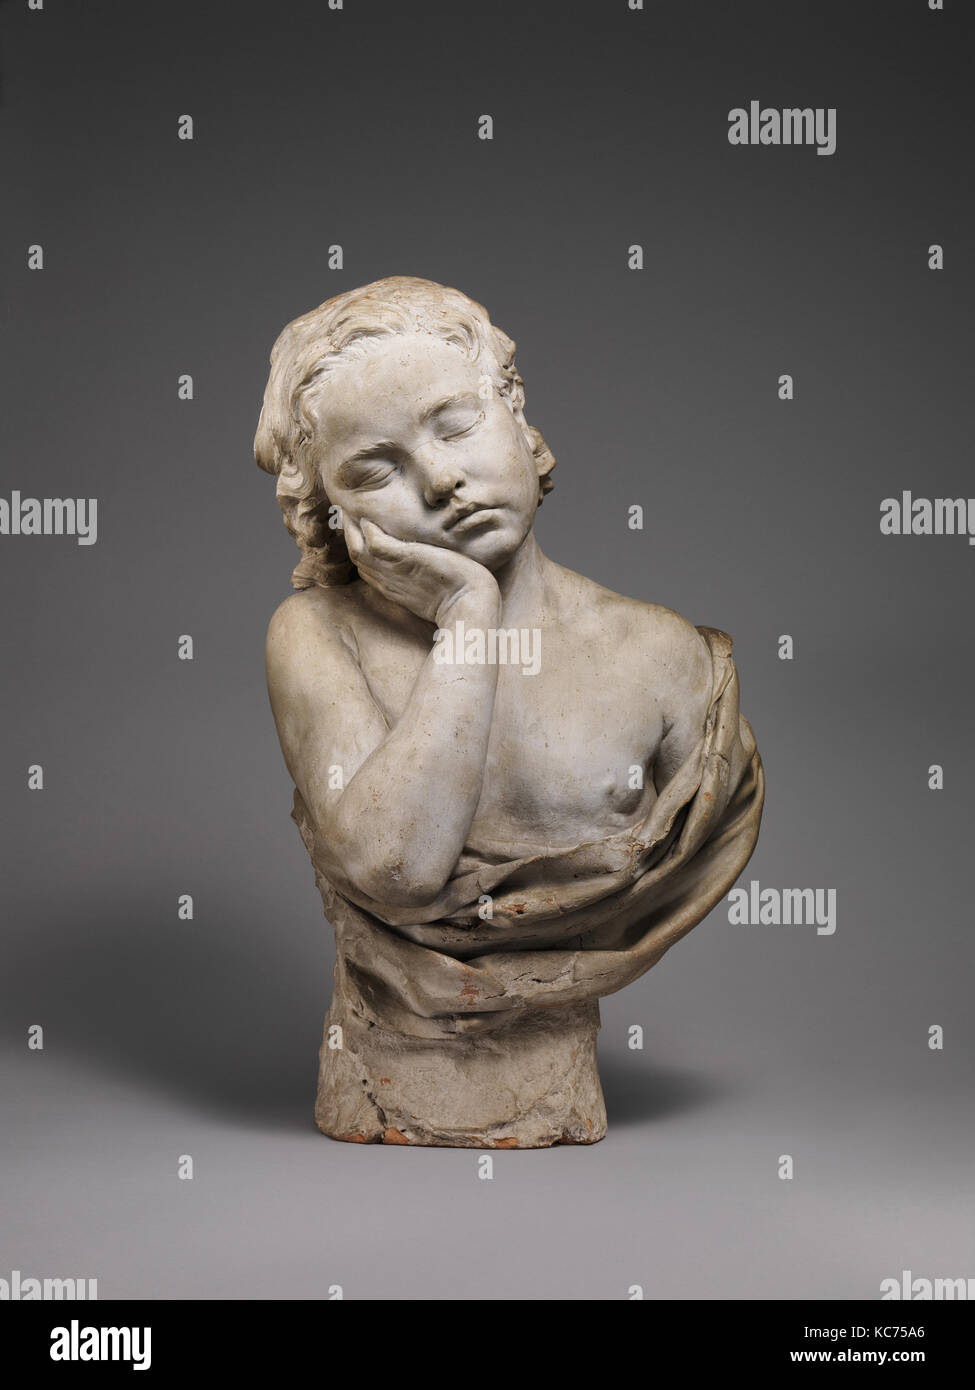 Sleeping Boy, ca. 1774, Italian, Rome, Terracotta, painted white, Overall (confirmed): 22 9/16 × 14 × 10 1/8 in., 53.9 lb. (57.3 Stock Photo